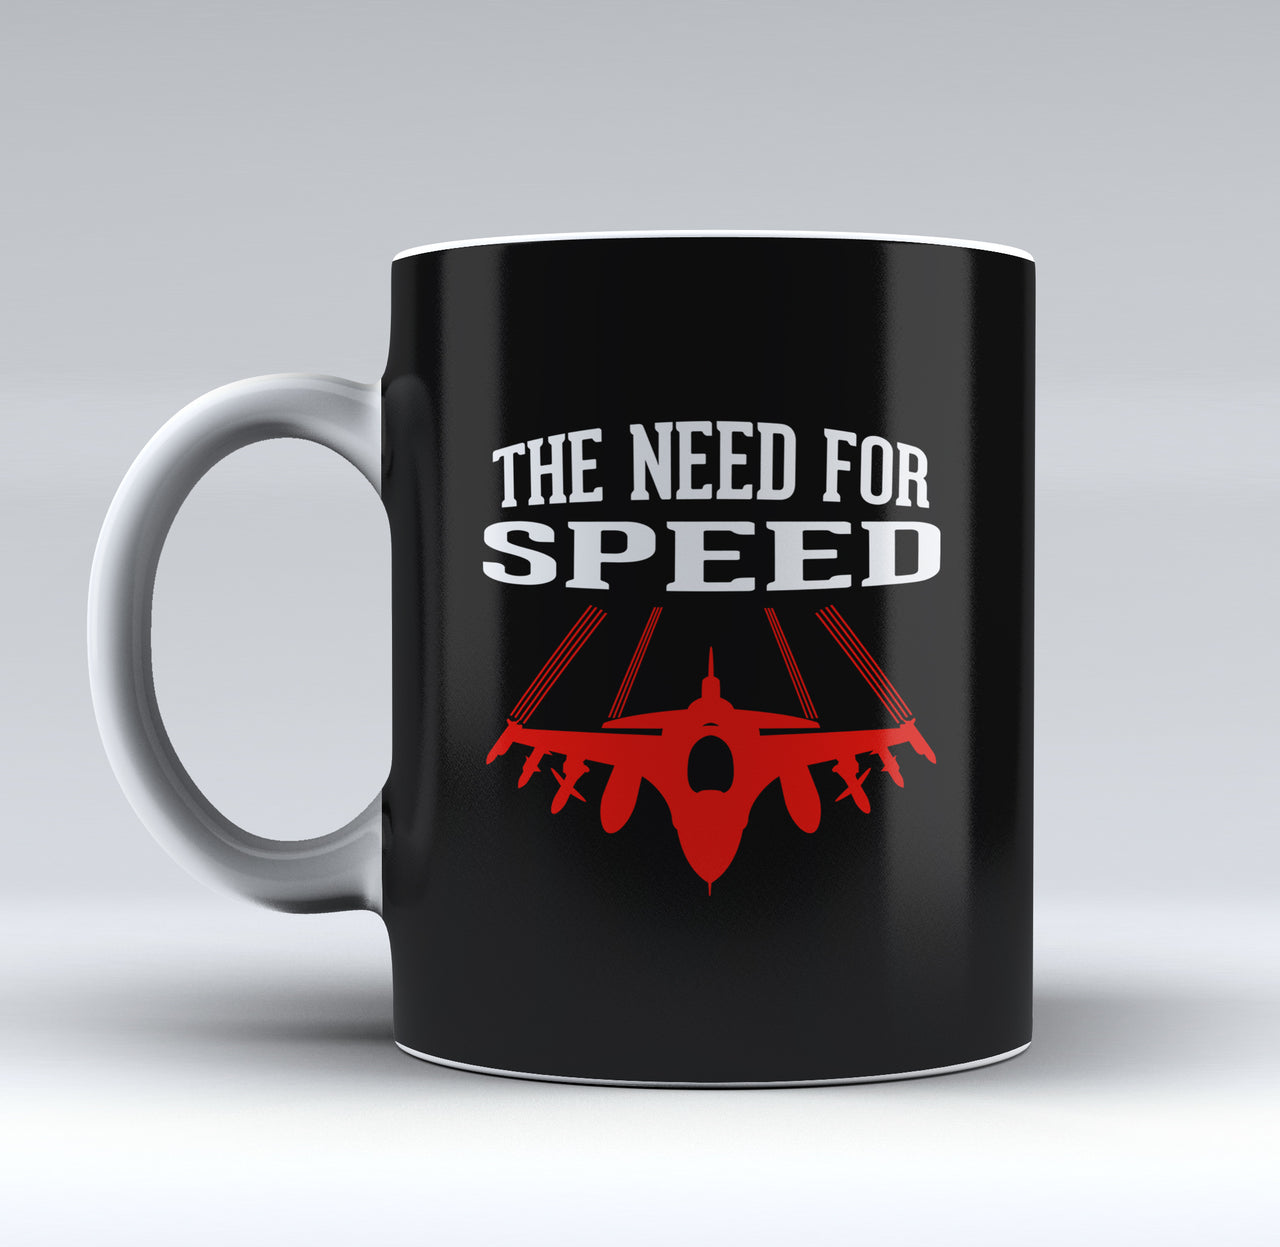 The Need For Speed Designed Mugs